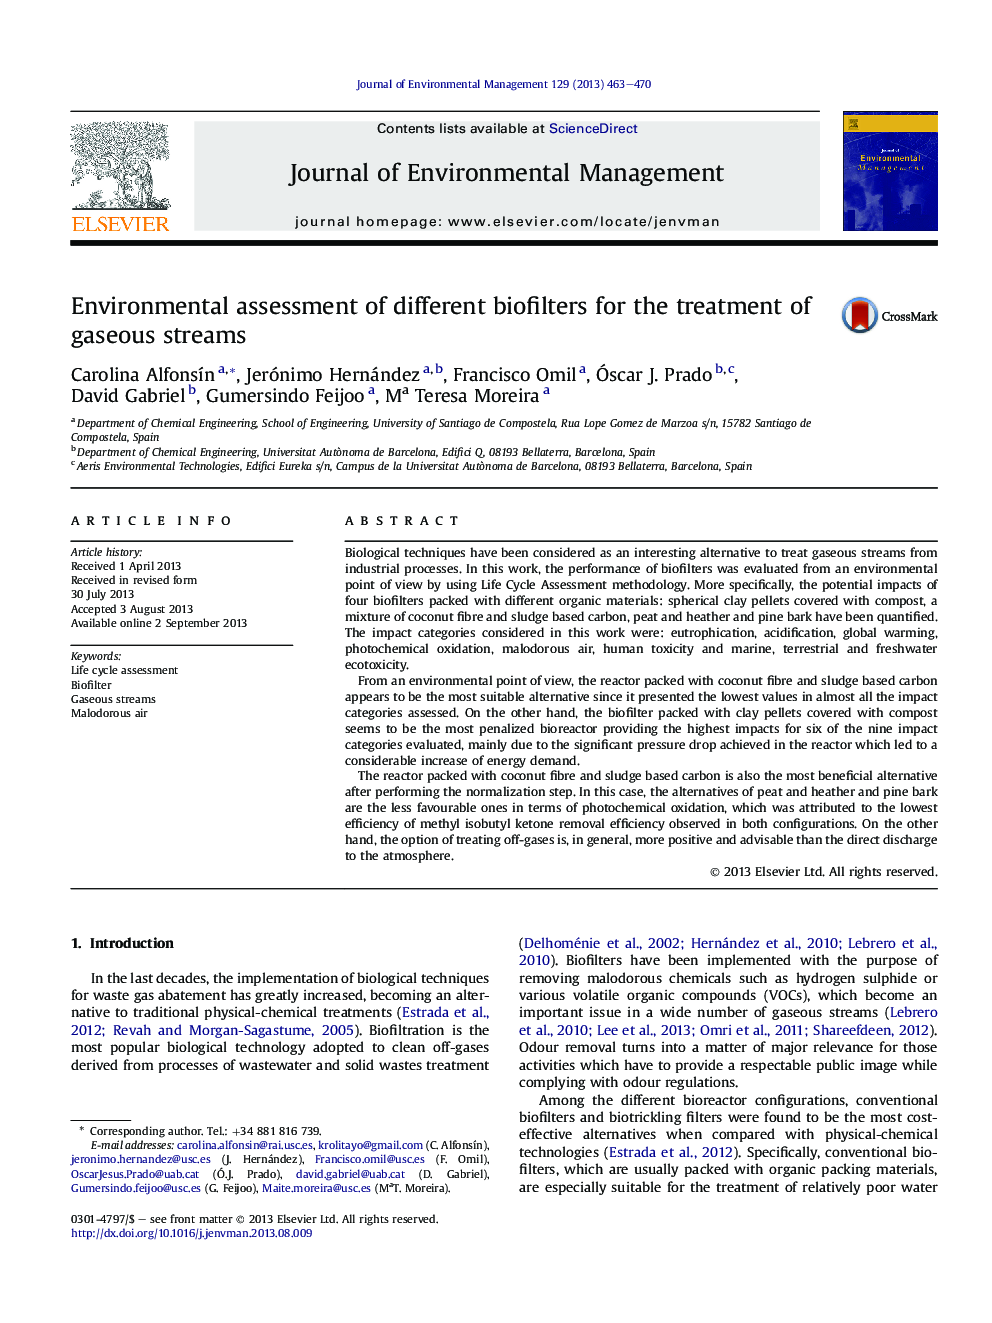 Environmental assessment of different biofilters for the treatment of gaseous streams